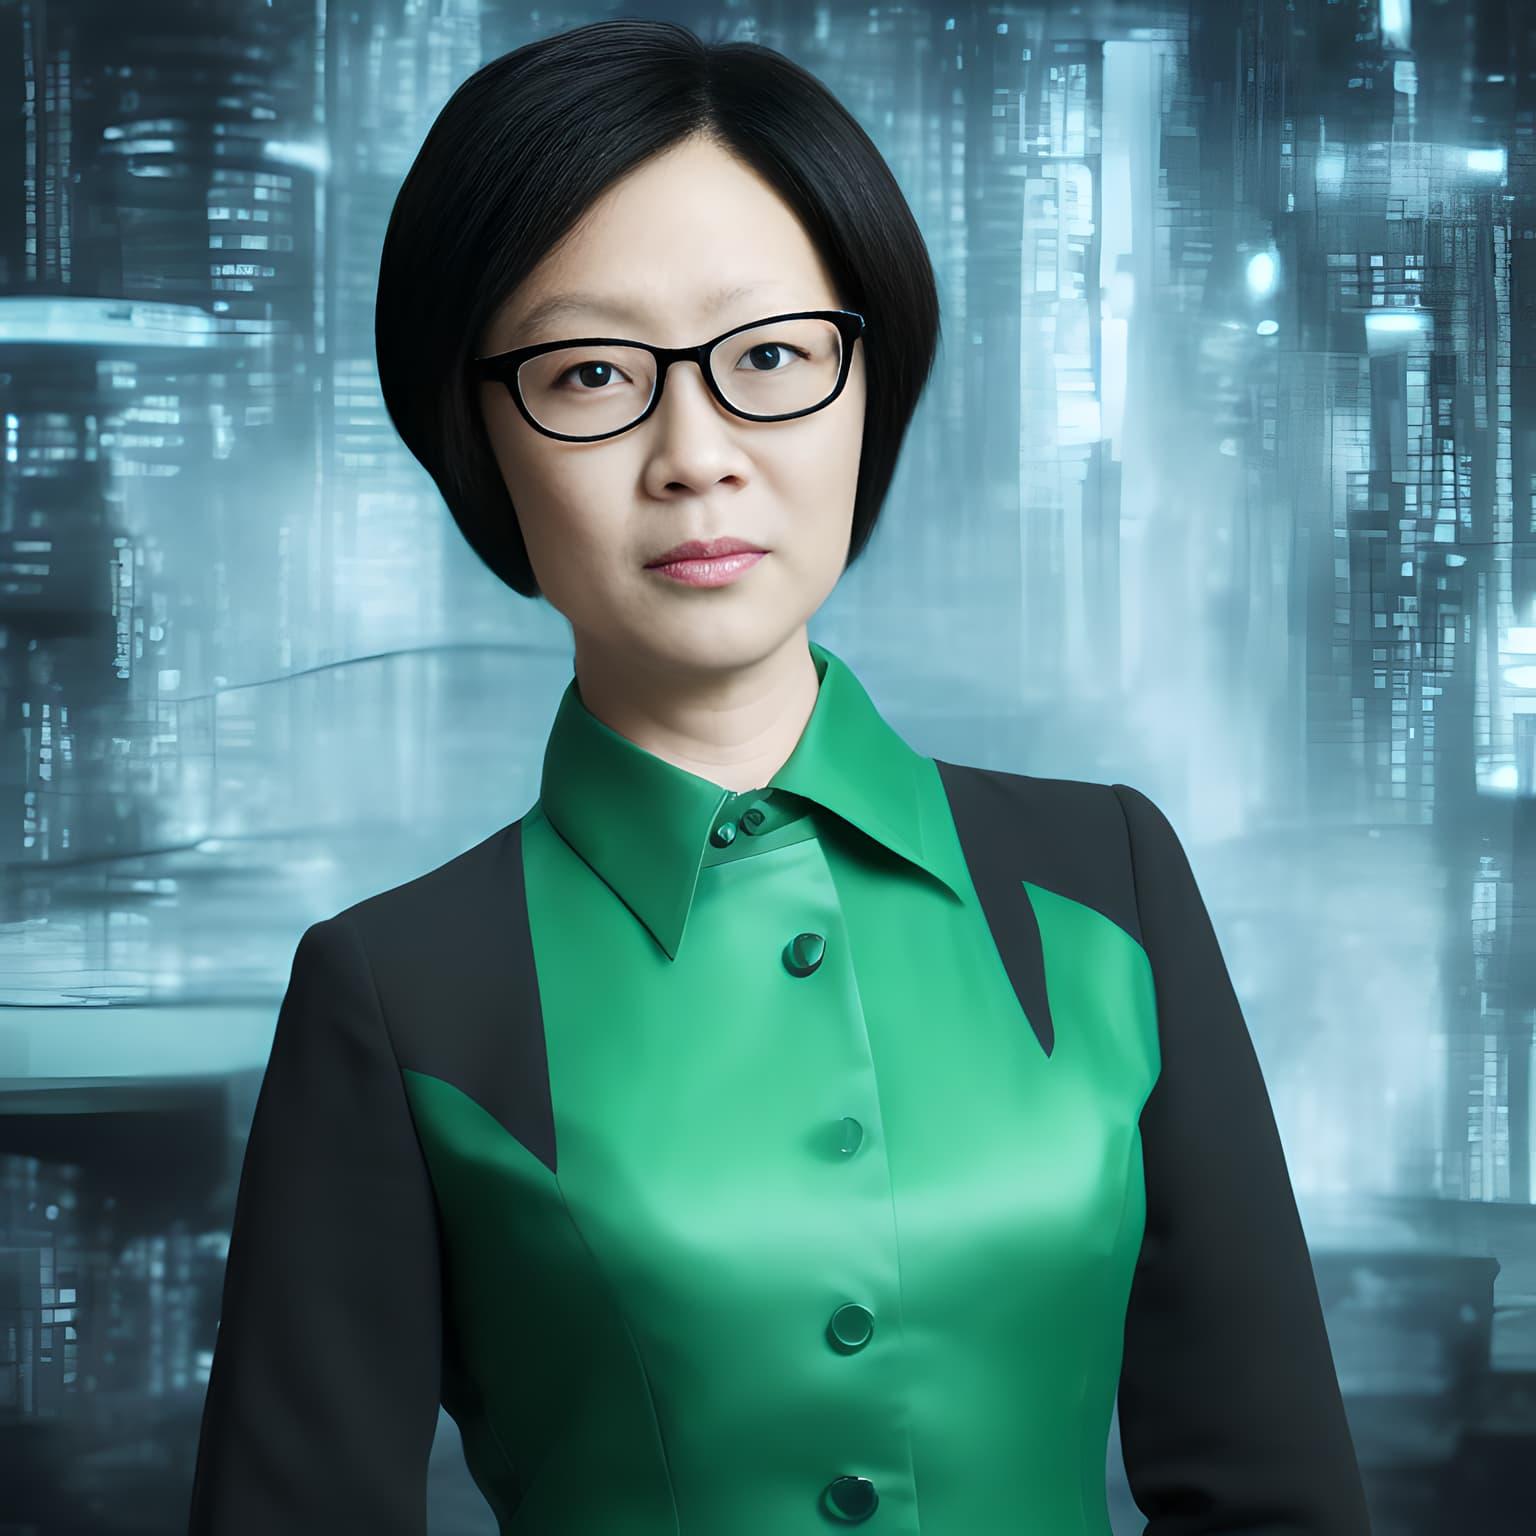 A Korean woman with short black hair and glasses, in a futuristic green and black suit, with a cyberpunk city in the background, with a neutral expression